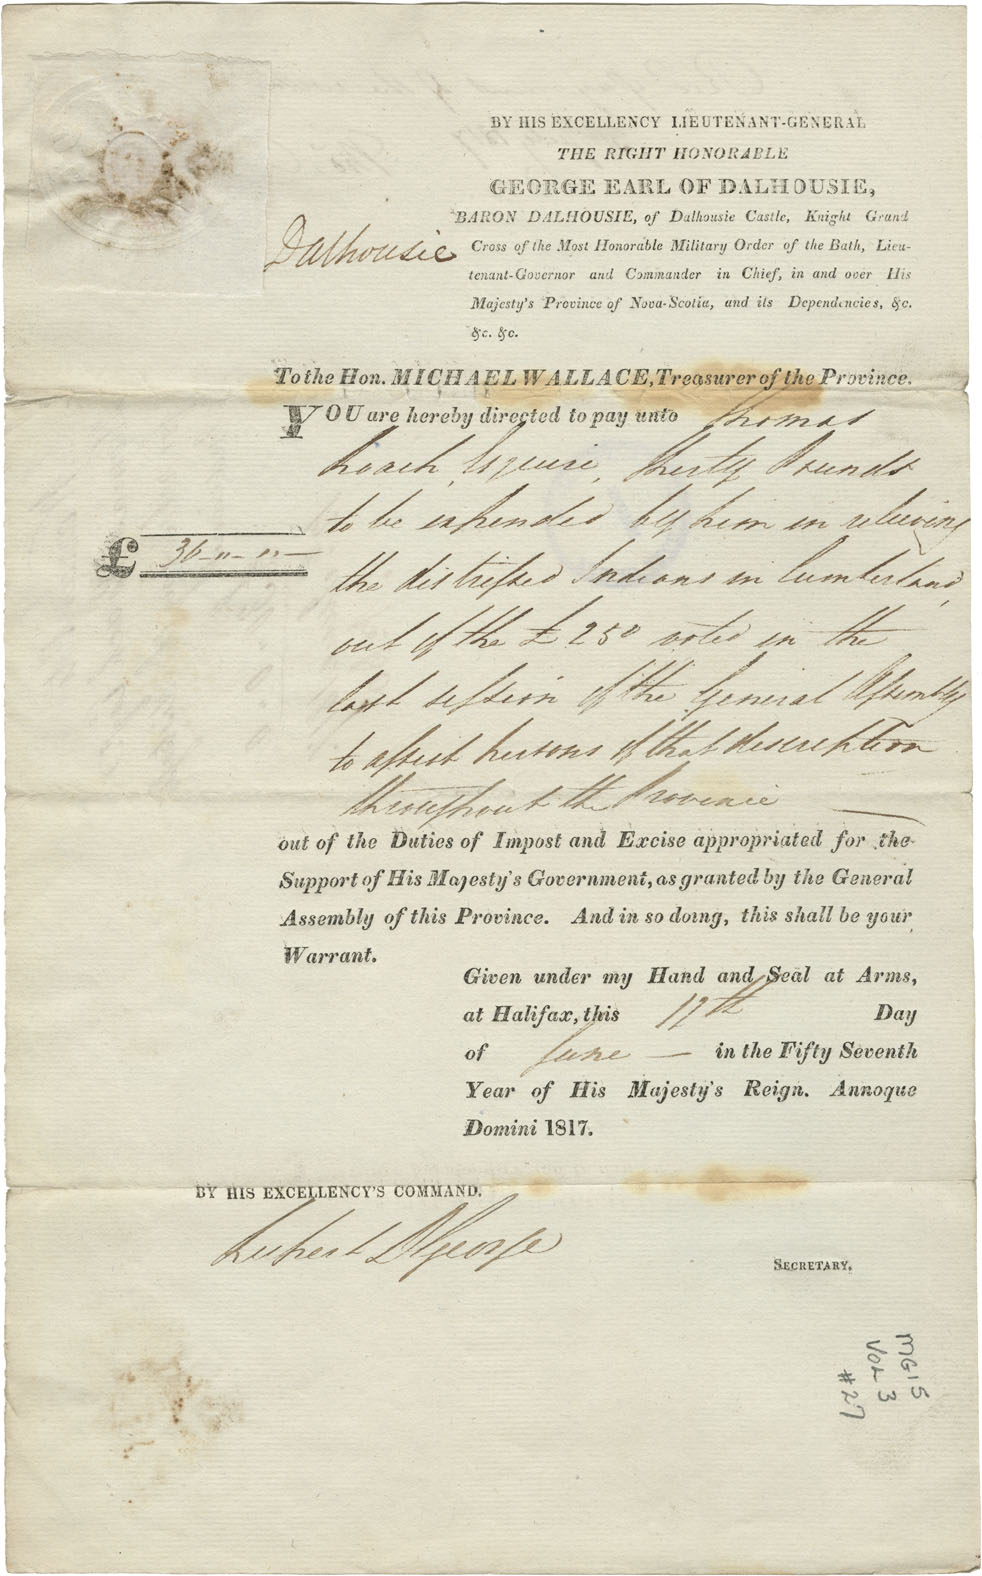 Dalhousie orders Michael Wallace, Treasurer, to pay Thomas Roach £30 for the relief of distressed Mi'kmaq at Shubenacadie. 